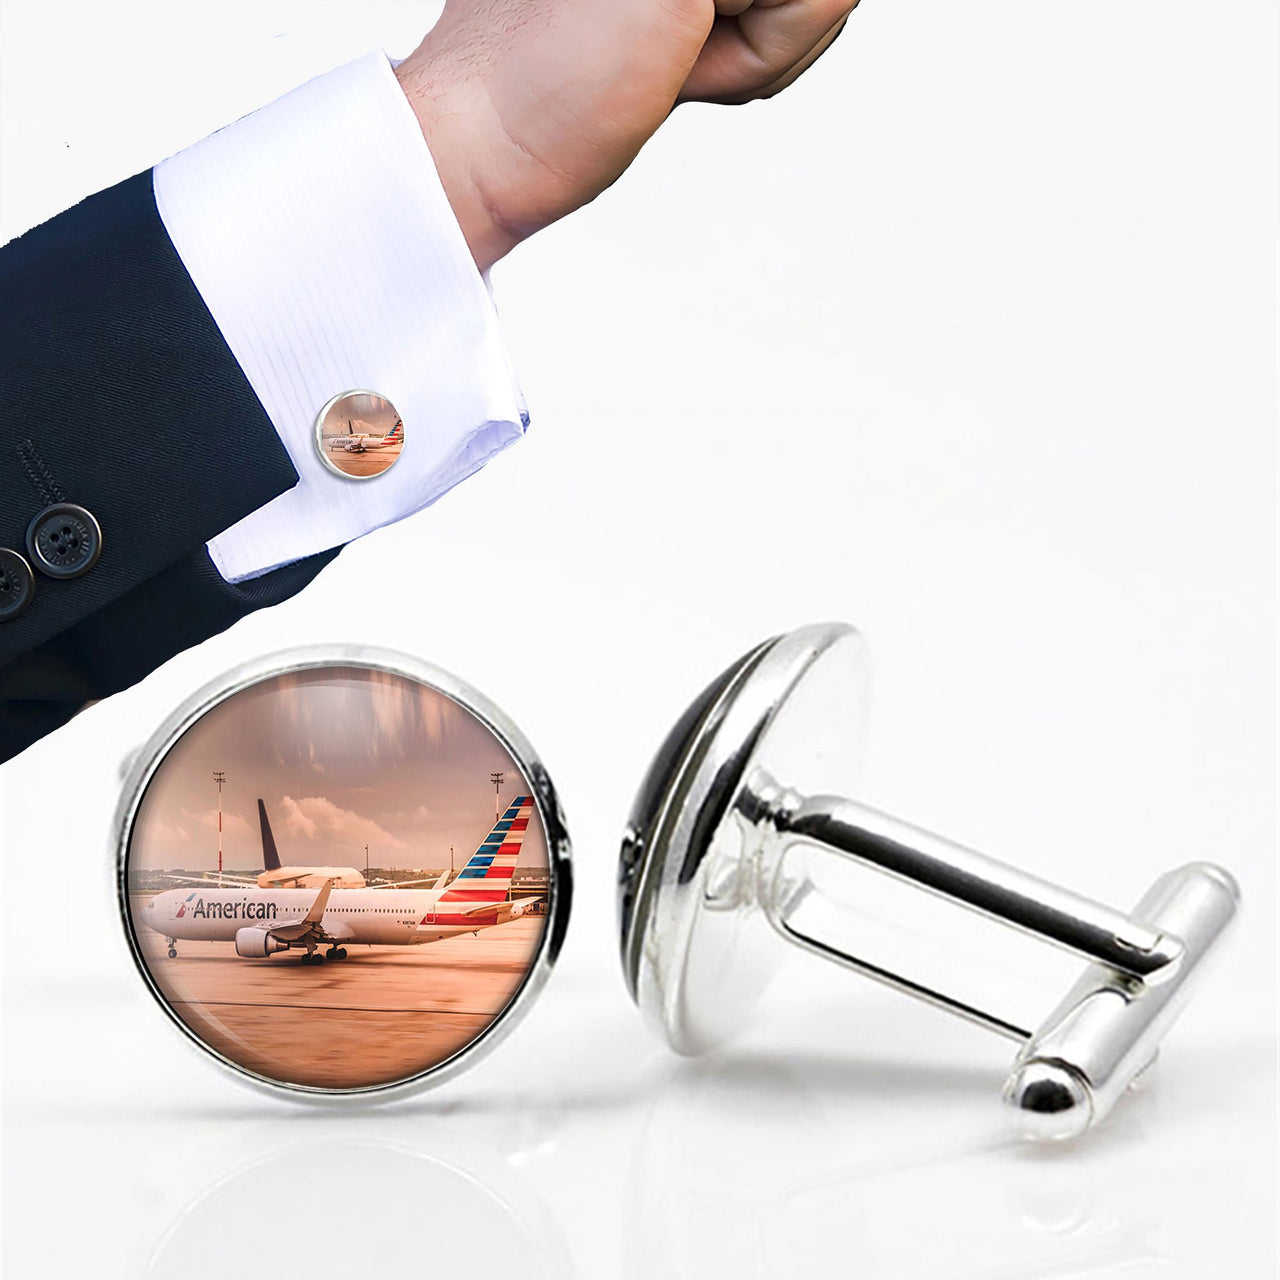 American Airlines Boeing 767 Designed Cuff Links